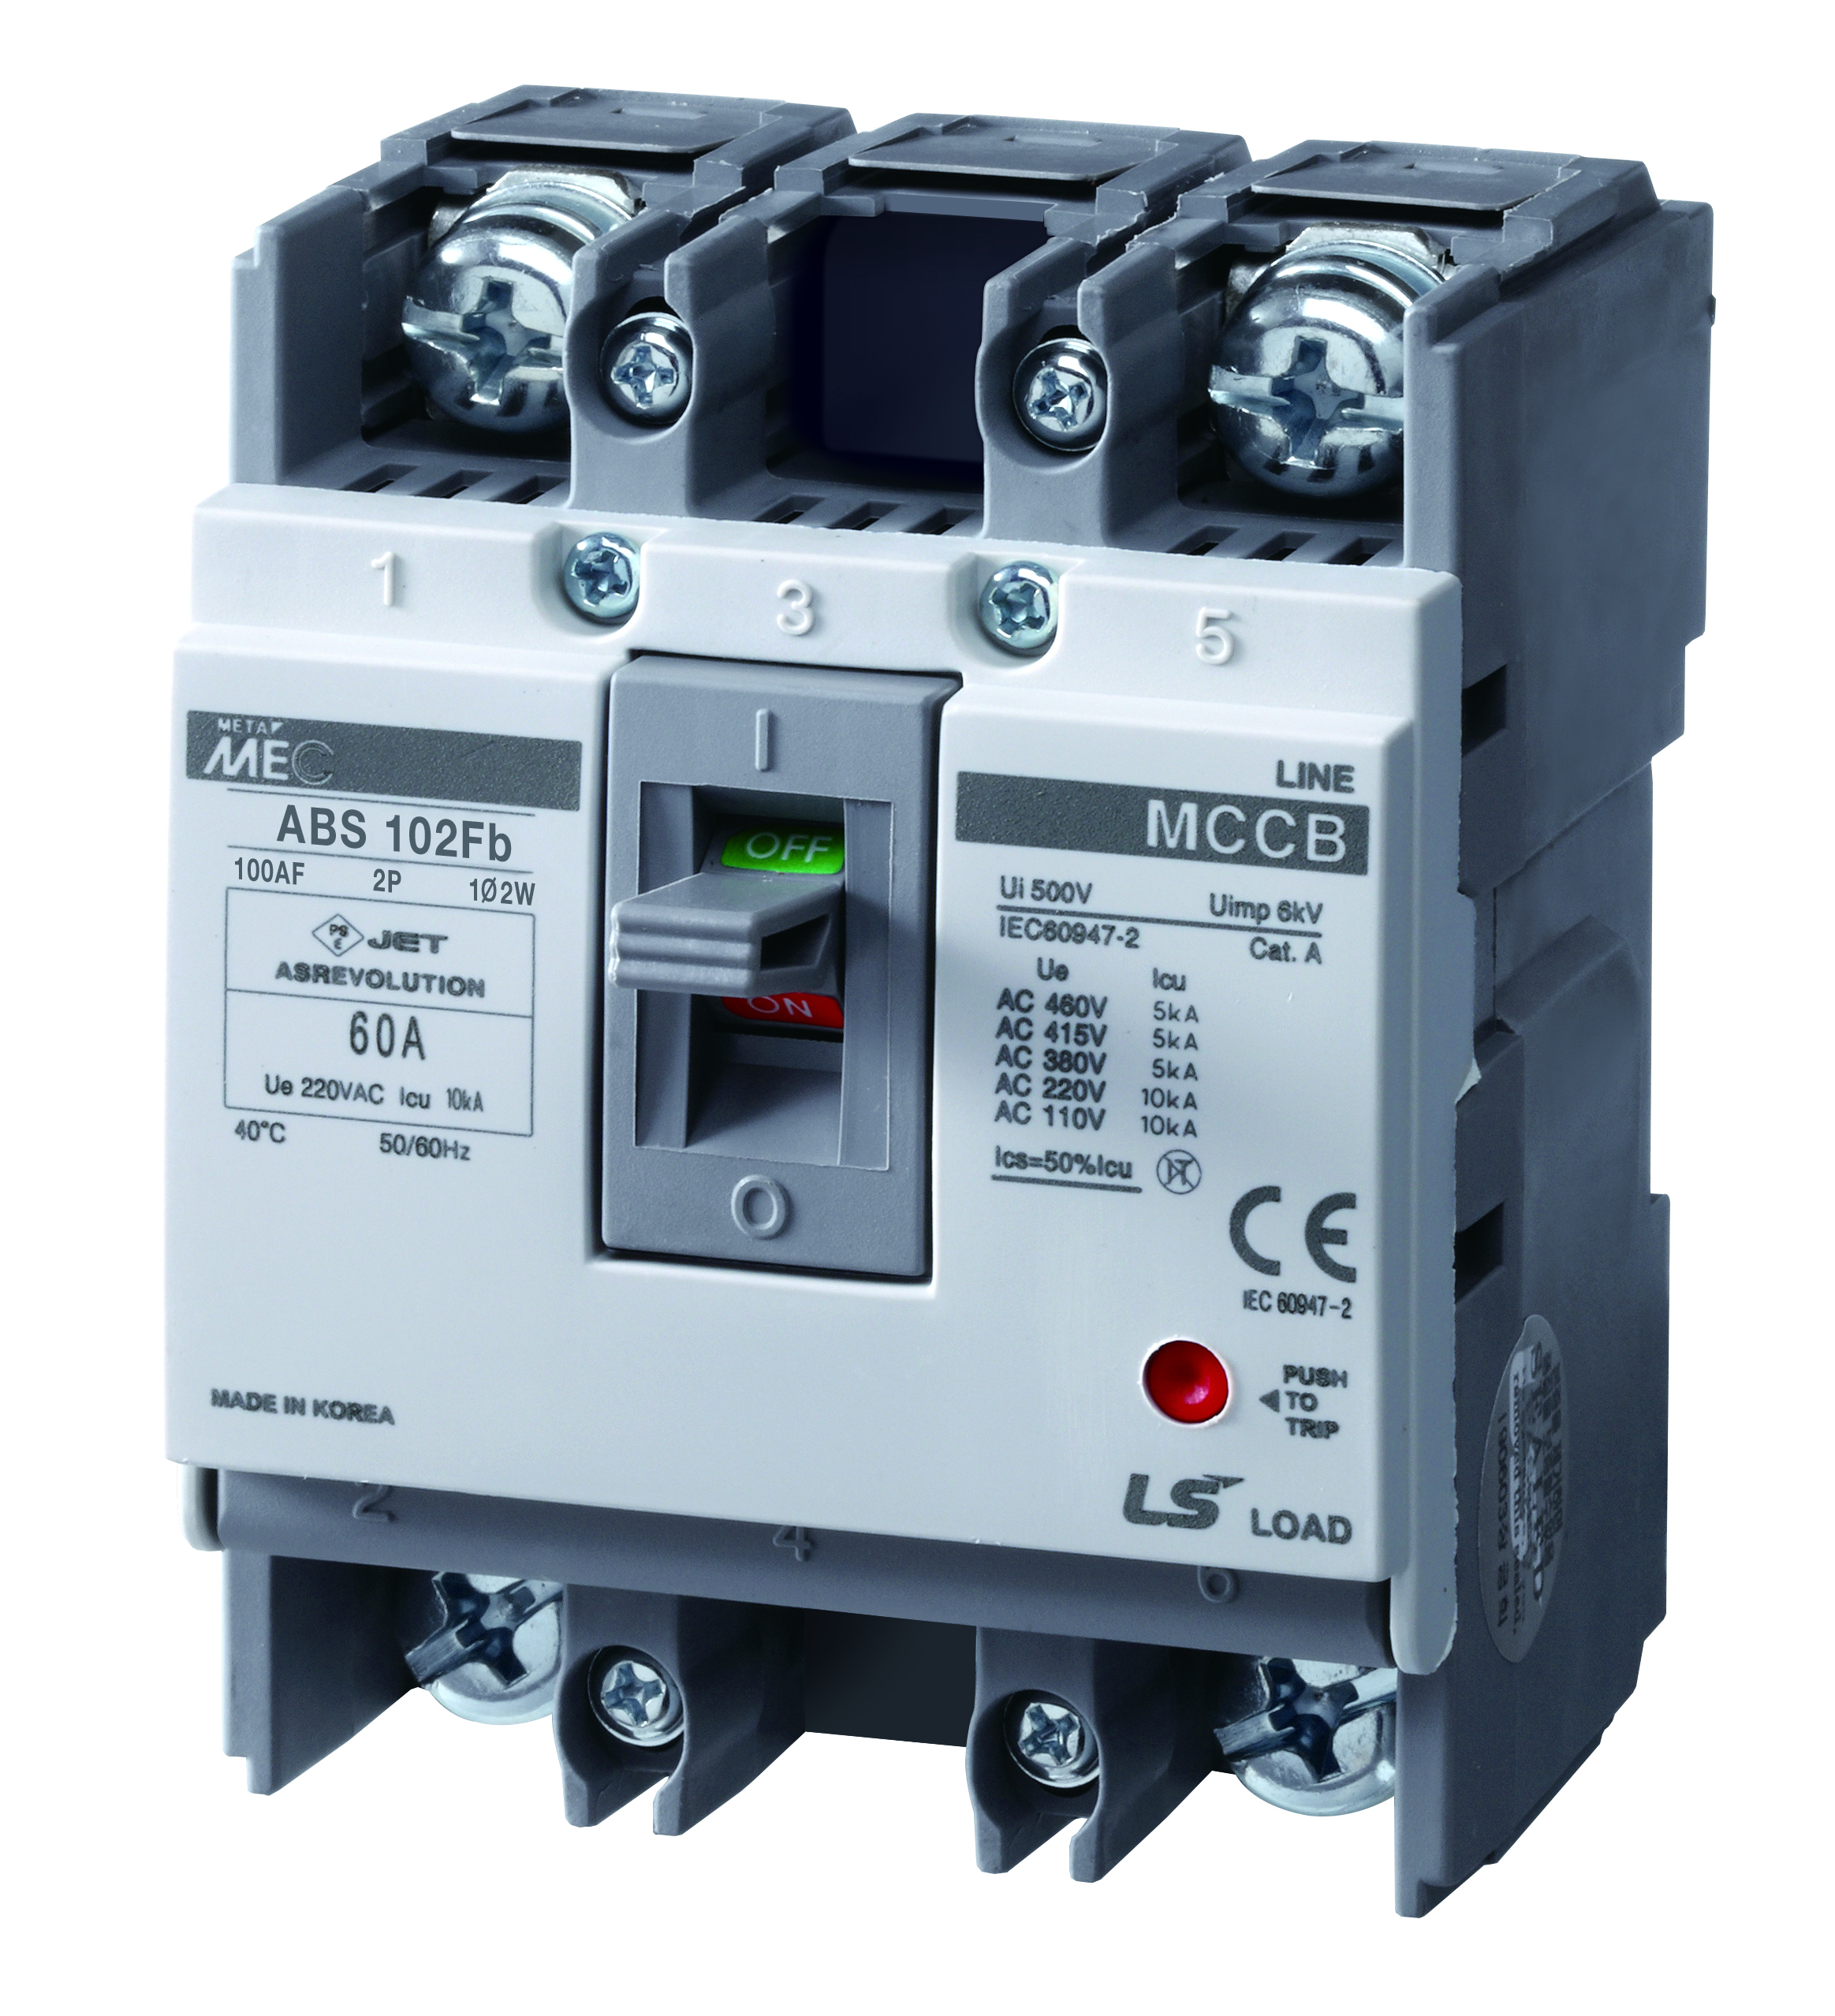 Molded Case Circuit Breakers - Fuseless, ABS Series, DIN Rail Mounting ABS102FB-75A